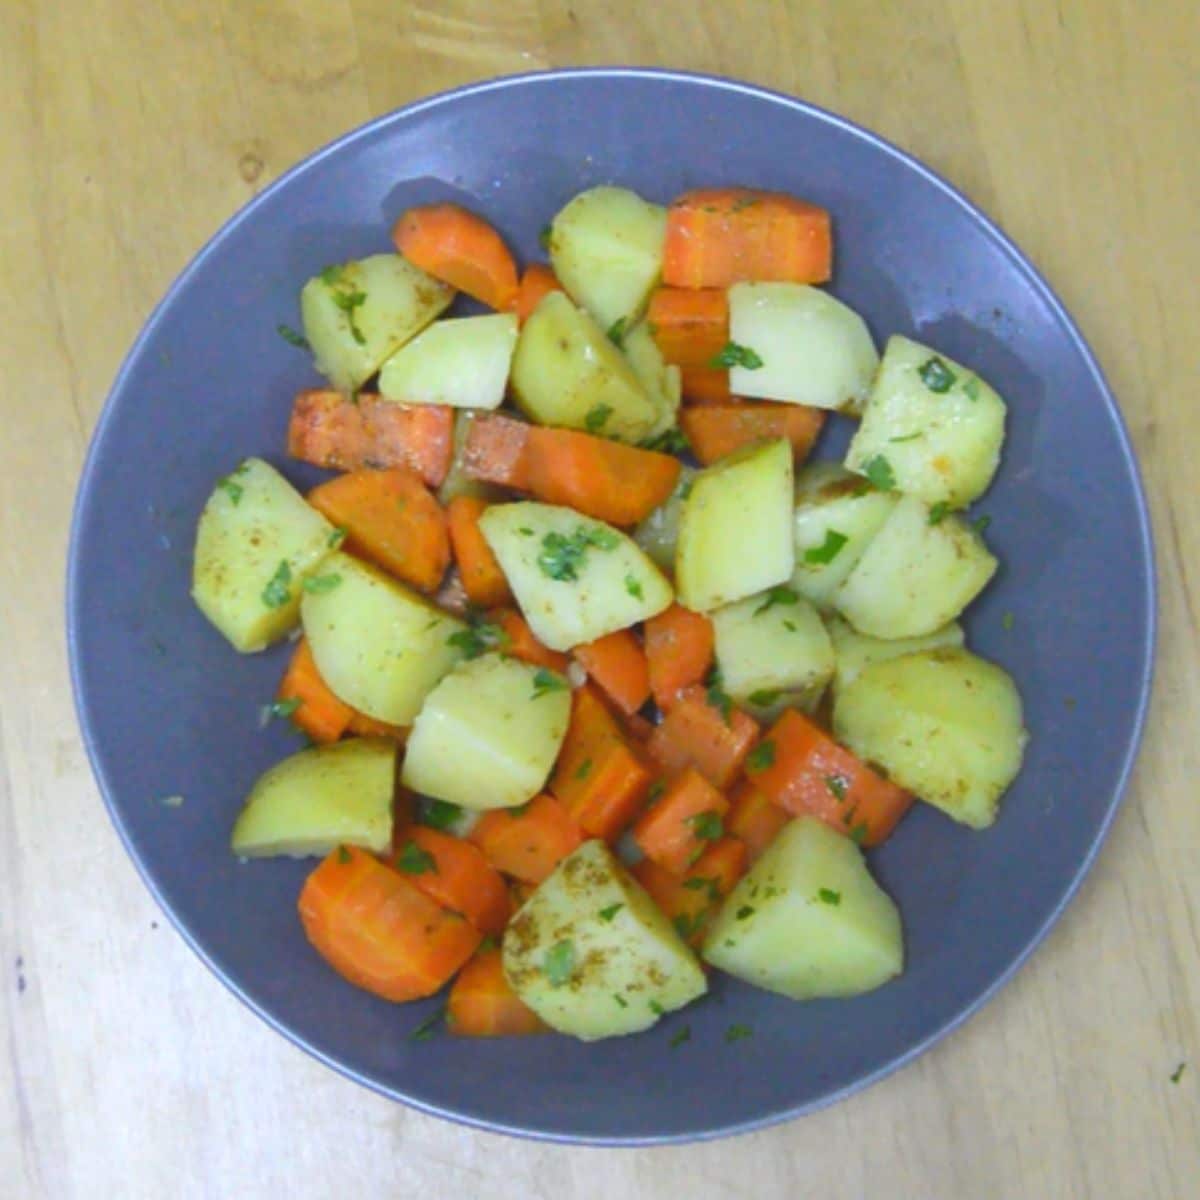 healthy steamed vegetables in a grey bowl placed on a wooden table.